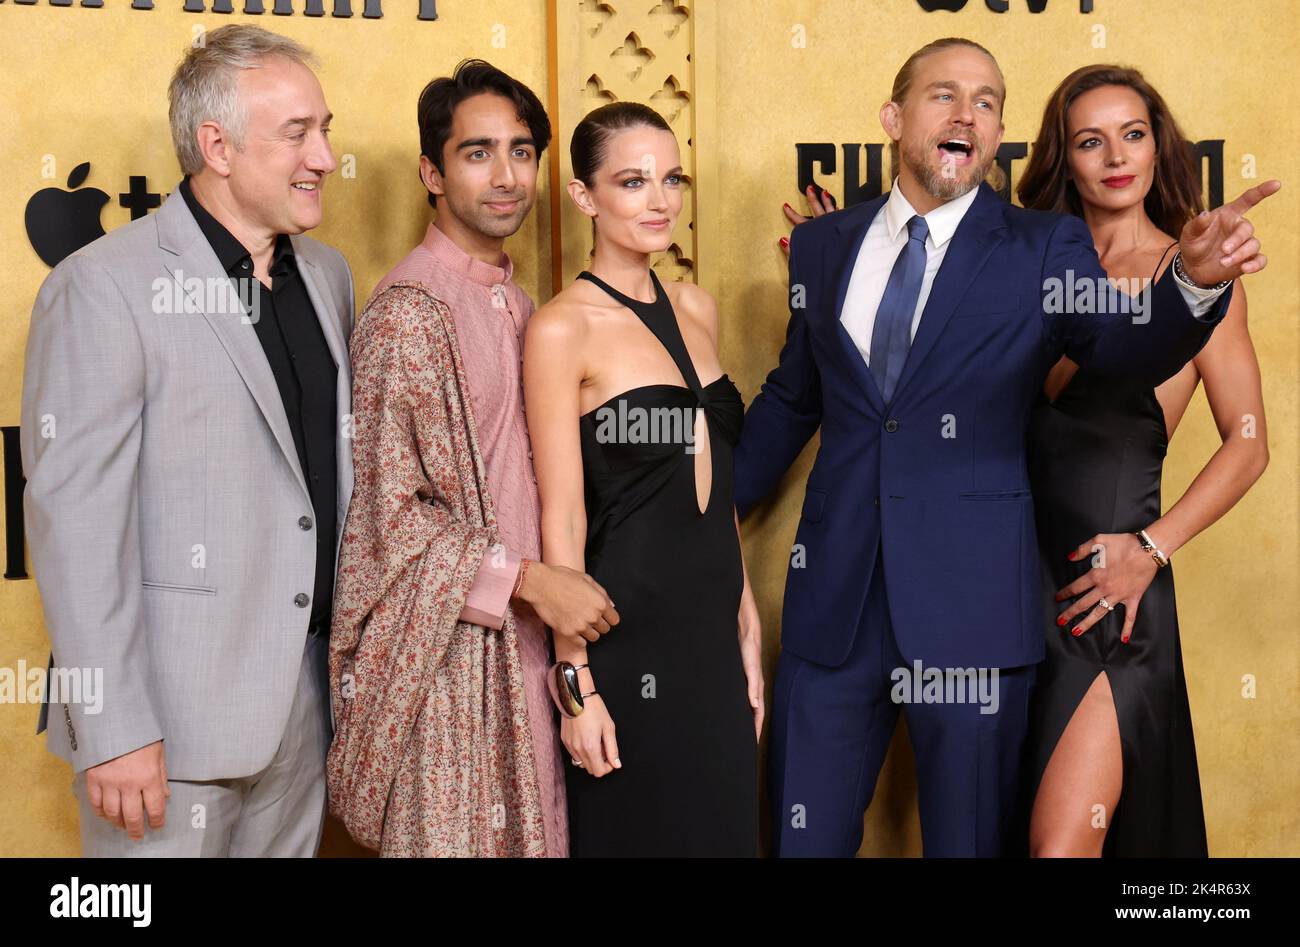 Executive Producer Steve Lightfoot along with cast members Shubham Saraf, Elektra Kilbey, Charlie Hunnam and Antonia Desplat attend a premiere for the television series 'Shantaram' in Los Angeles, California, U.S., October 3, 2022.  REUTERS/Mario Anzuoni Stock Photo